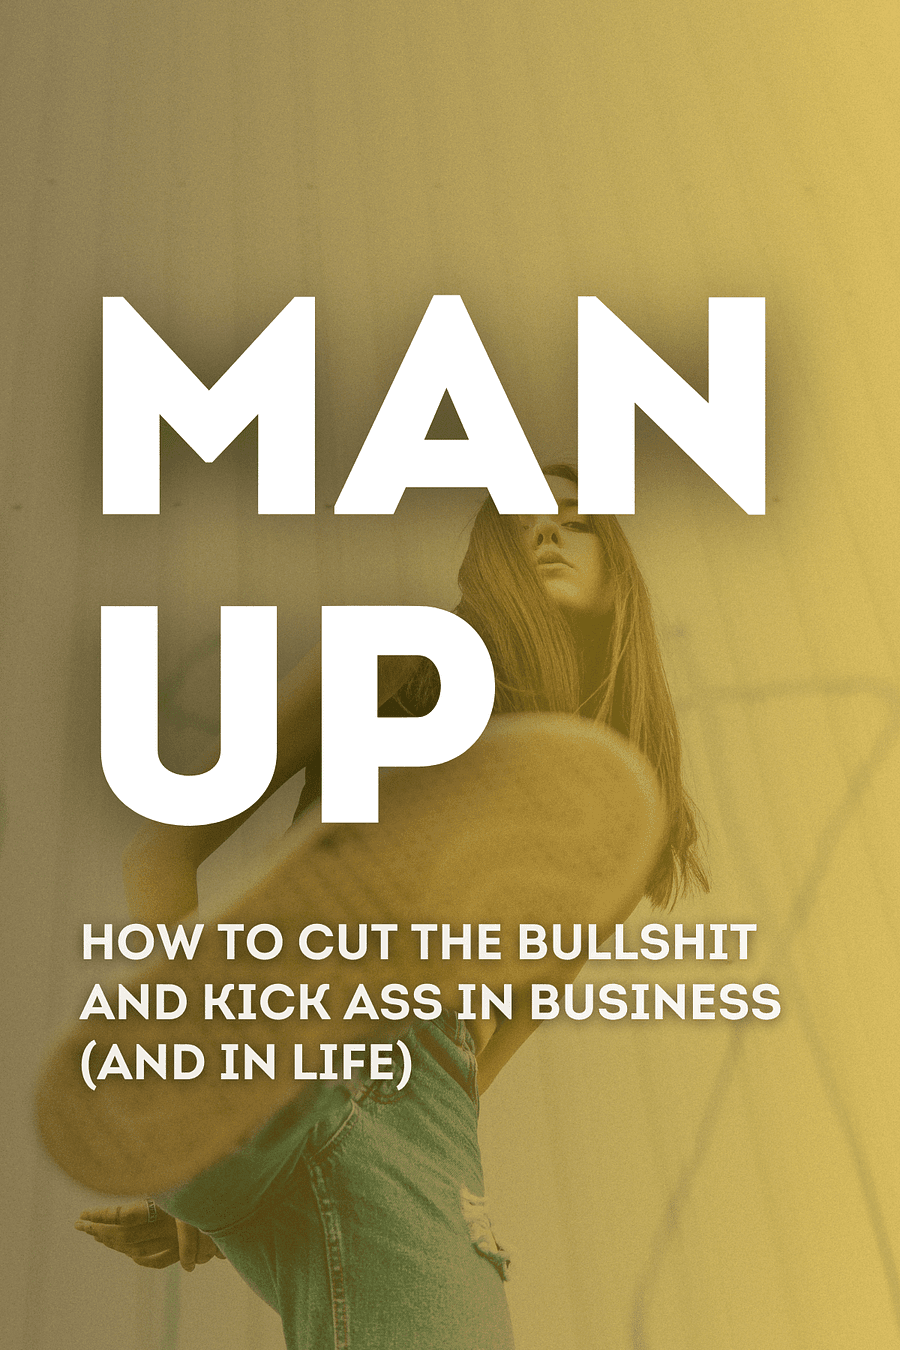 Man Up by Bedros Keuilian - Book Summary